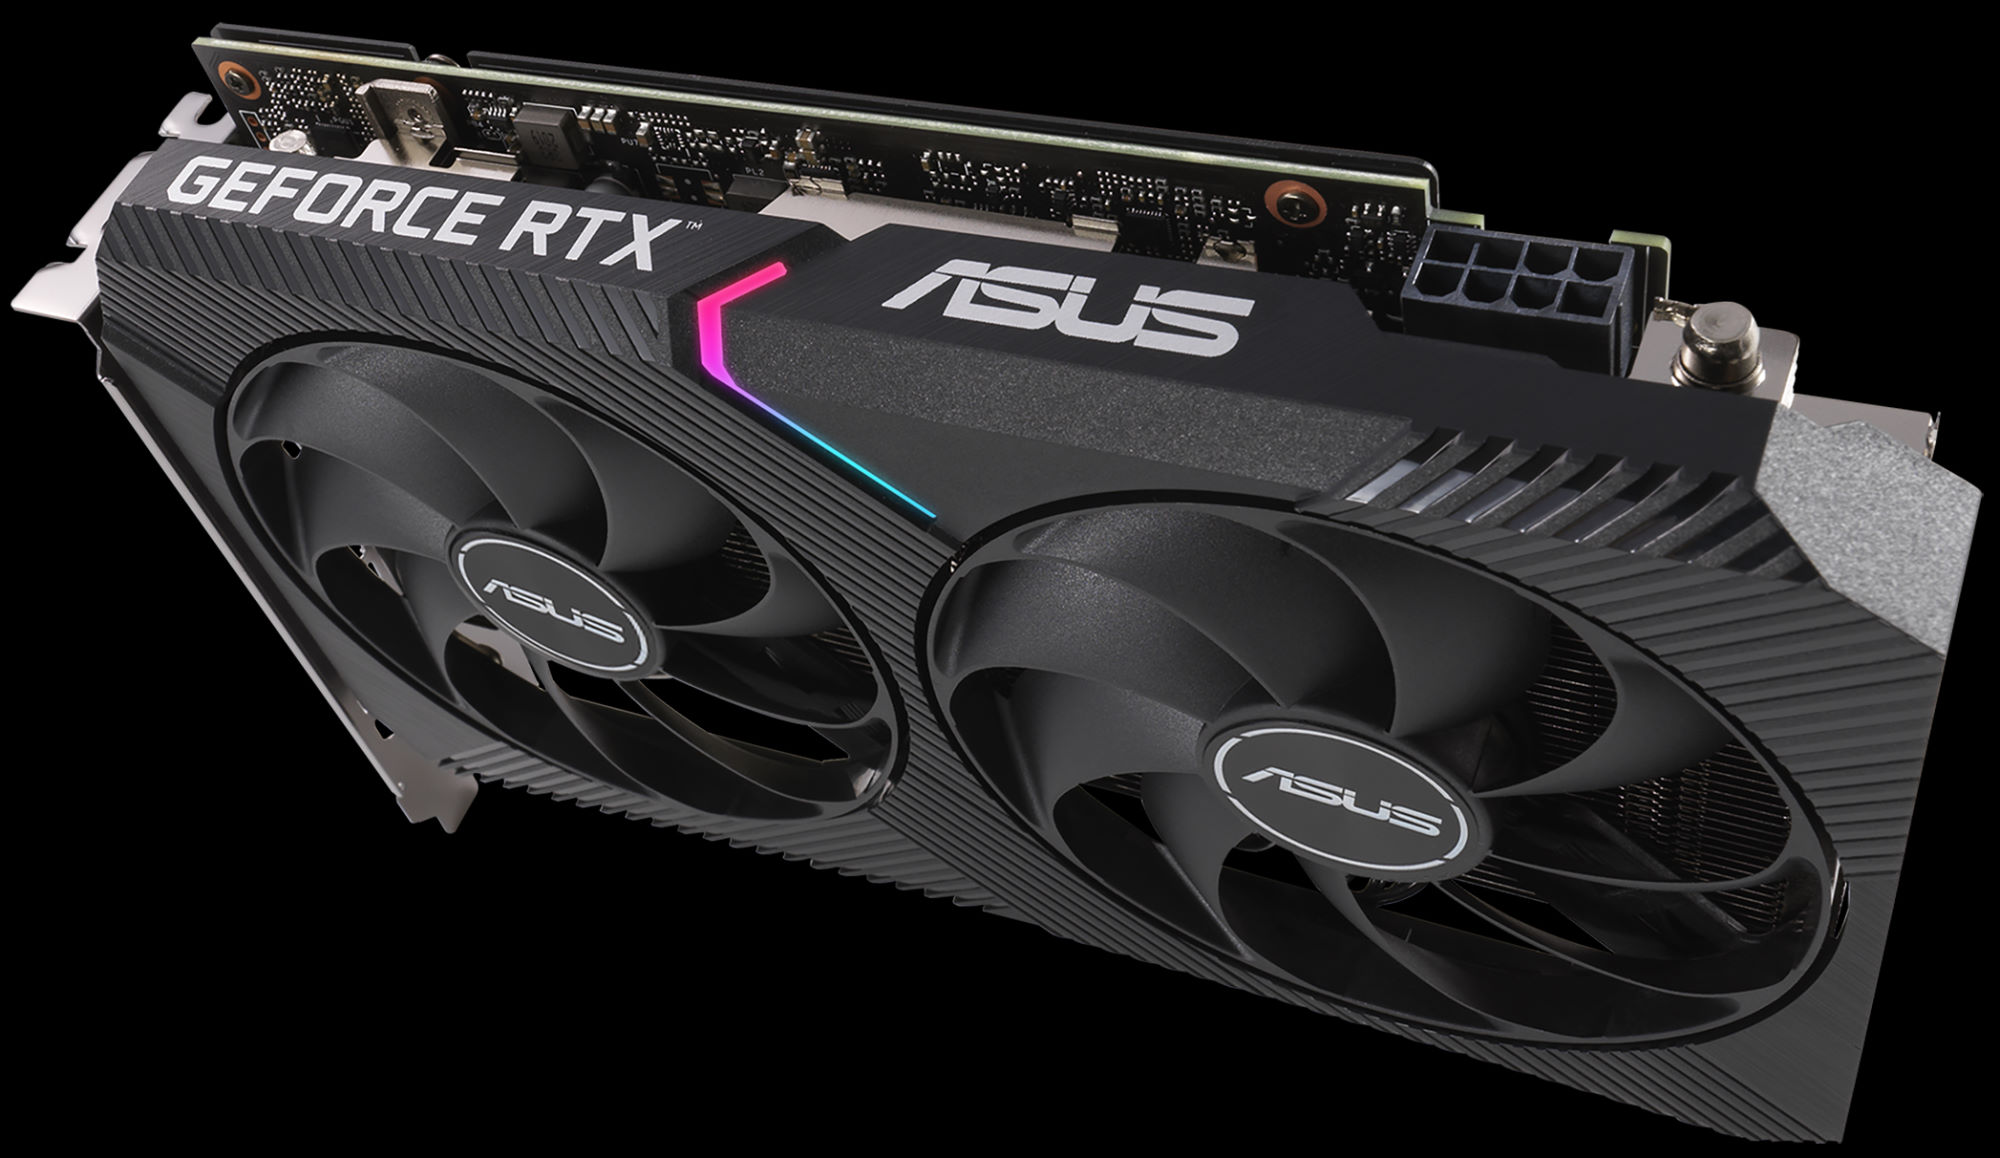 ASUS GeForce RTX 3060 Ti graphics cards are ready for every build with ROG  Strix, TUF Gaming, Dual, Dual Mini, and KO